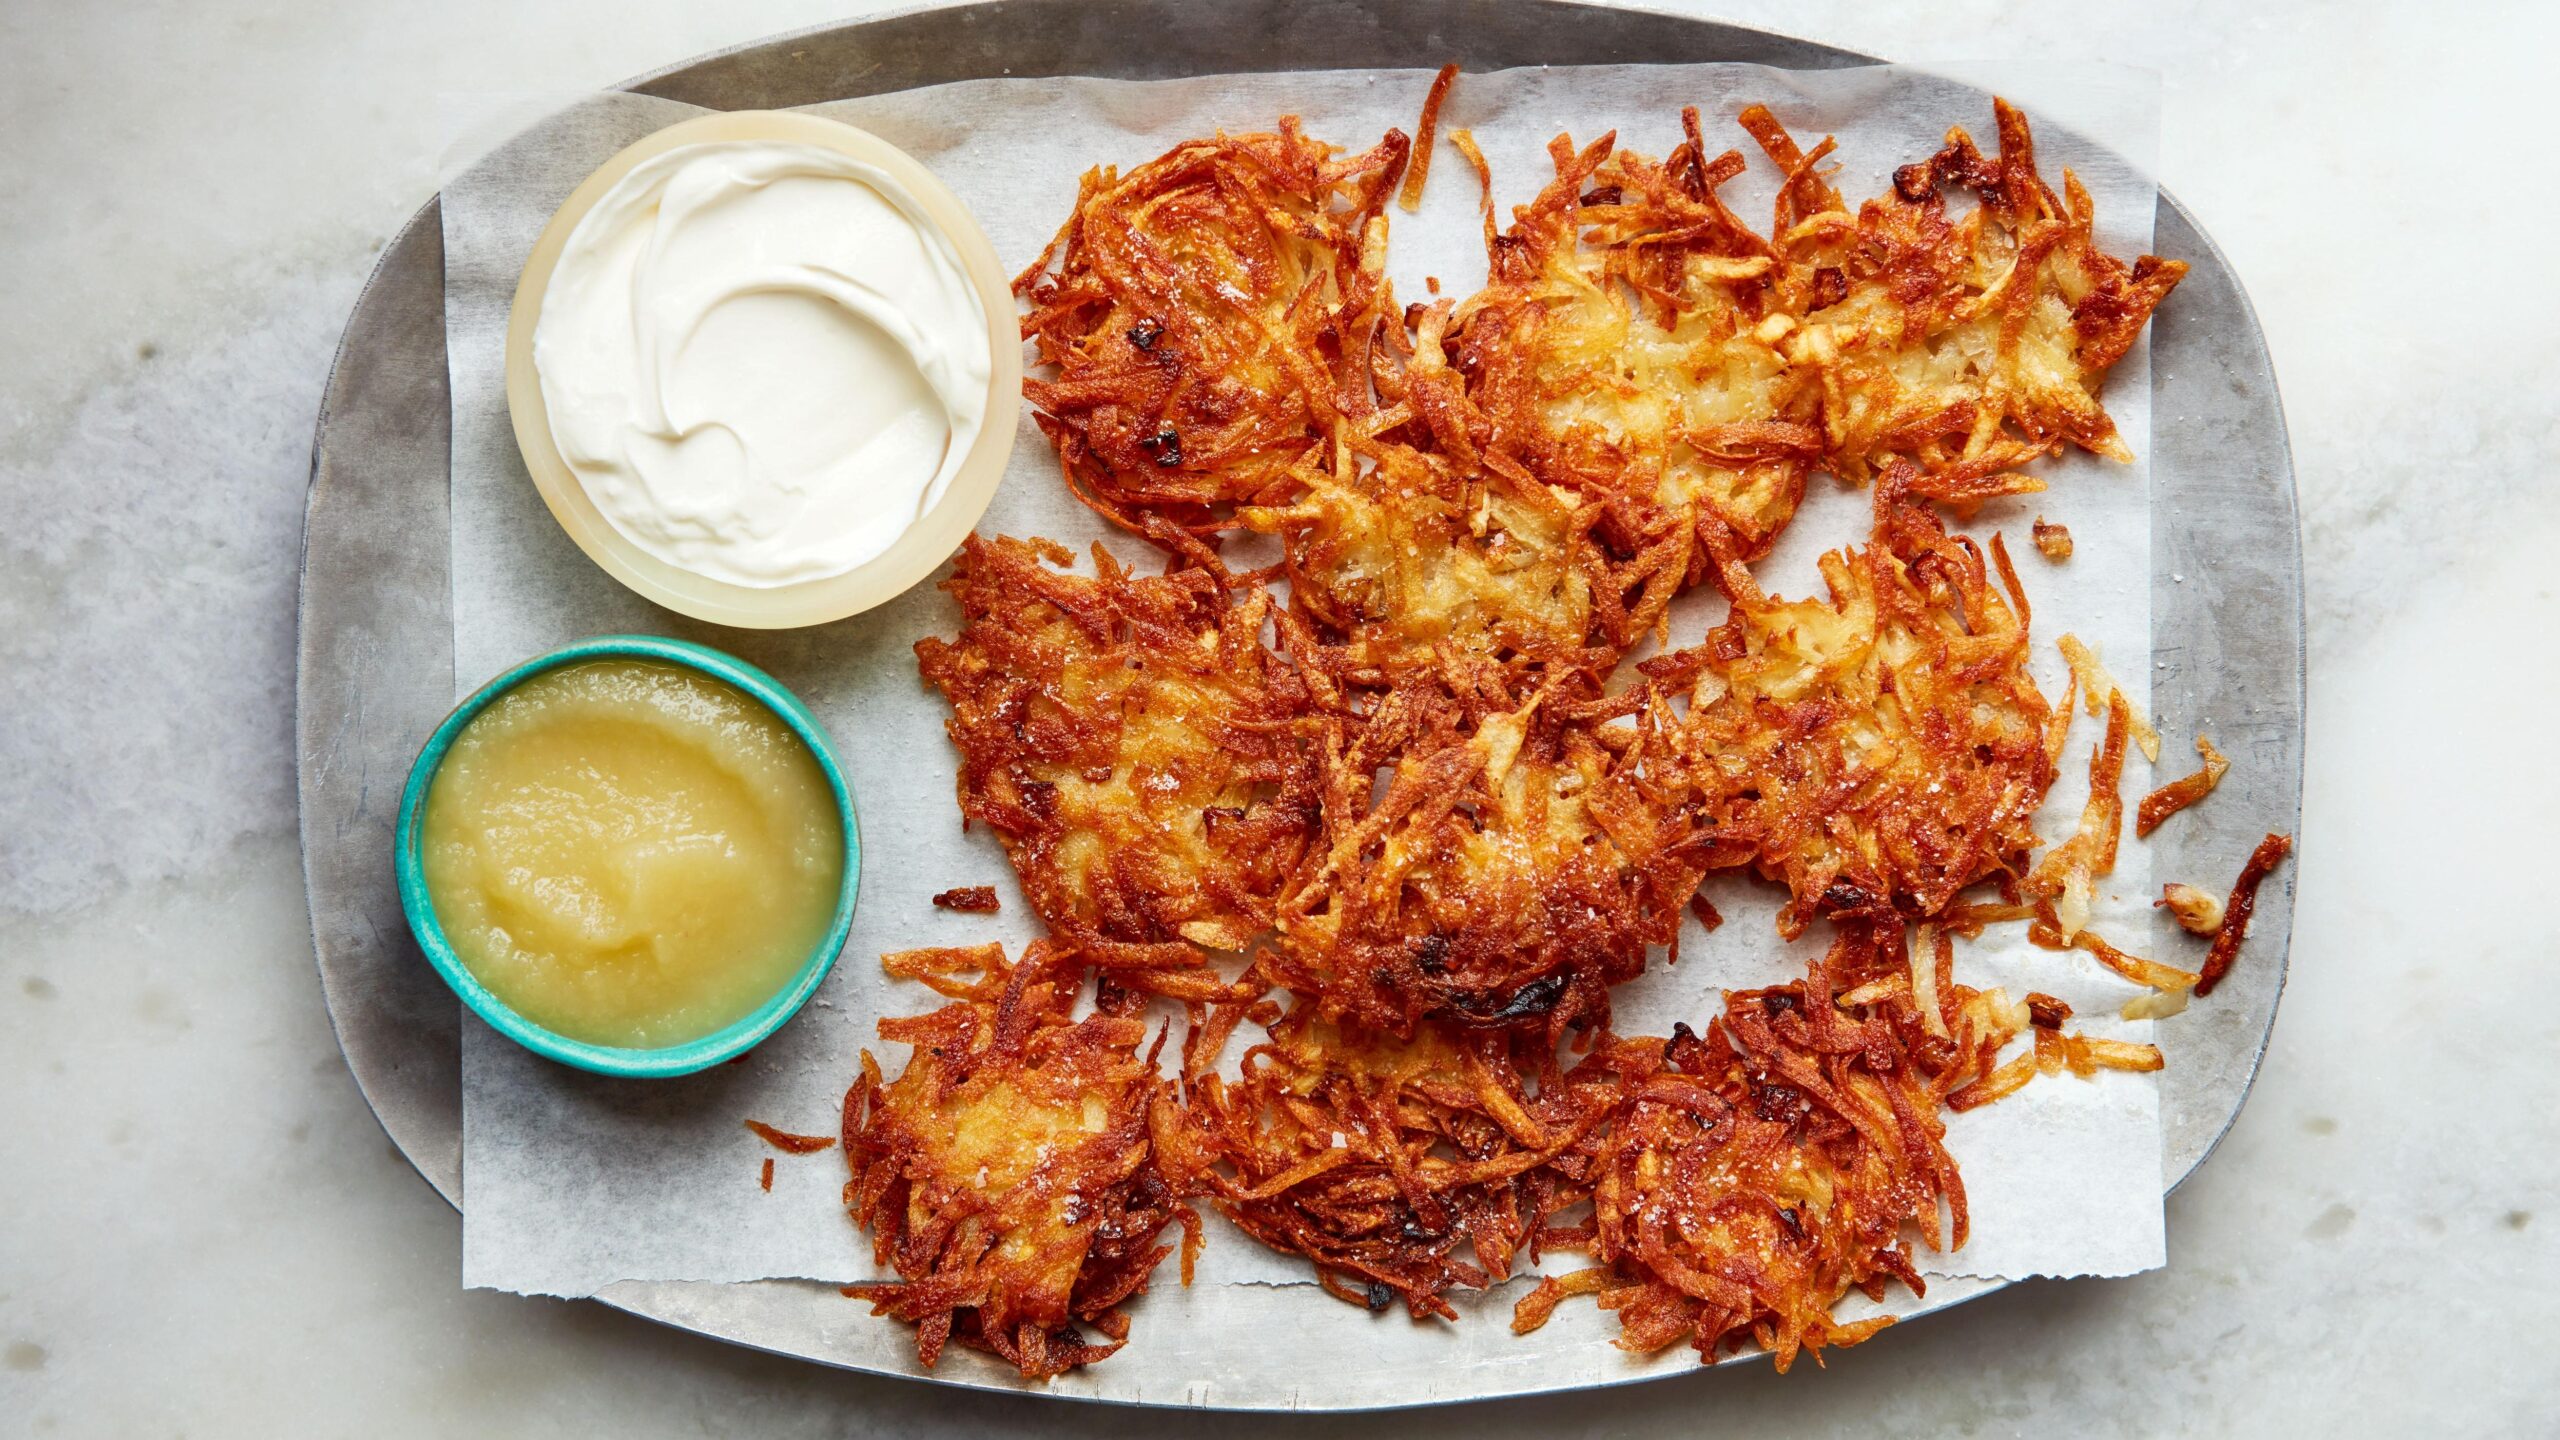  Crispy and golden brown Potato Latkes coming straight out of the pan!